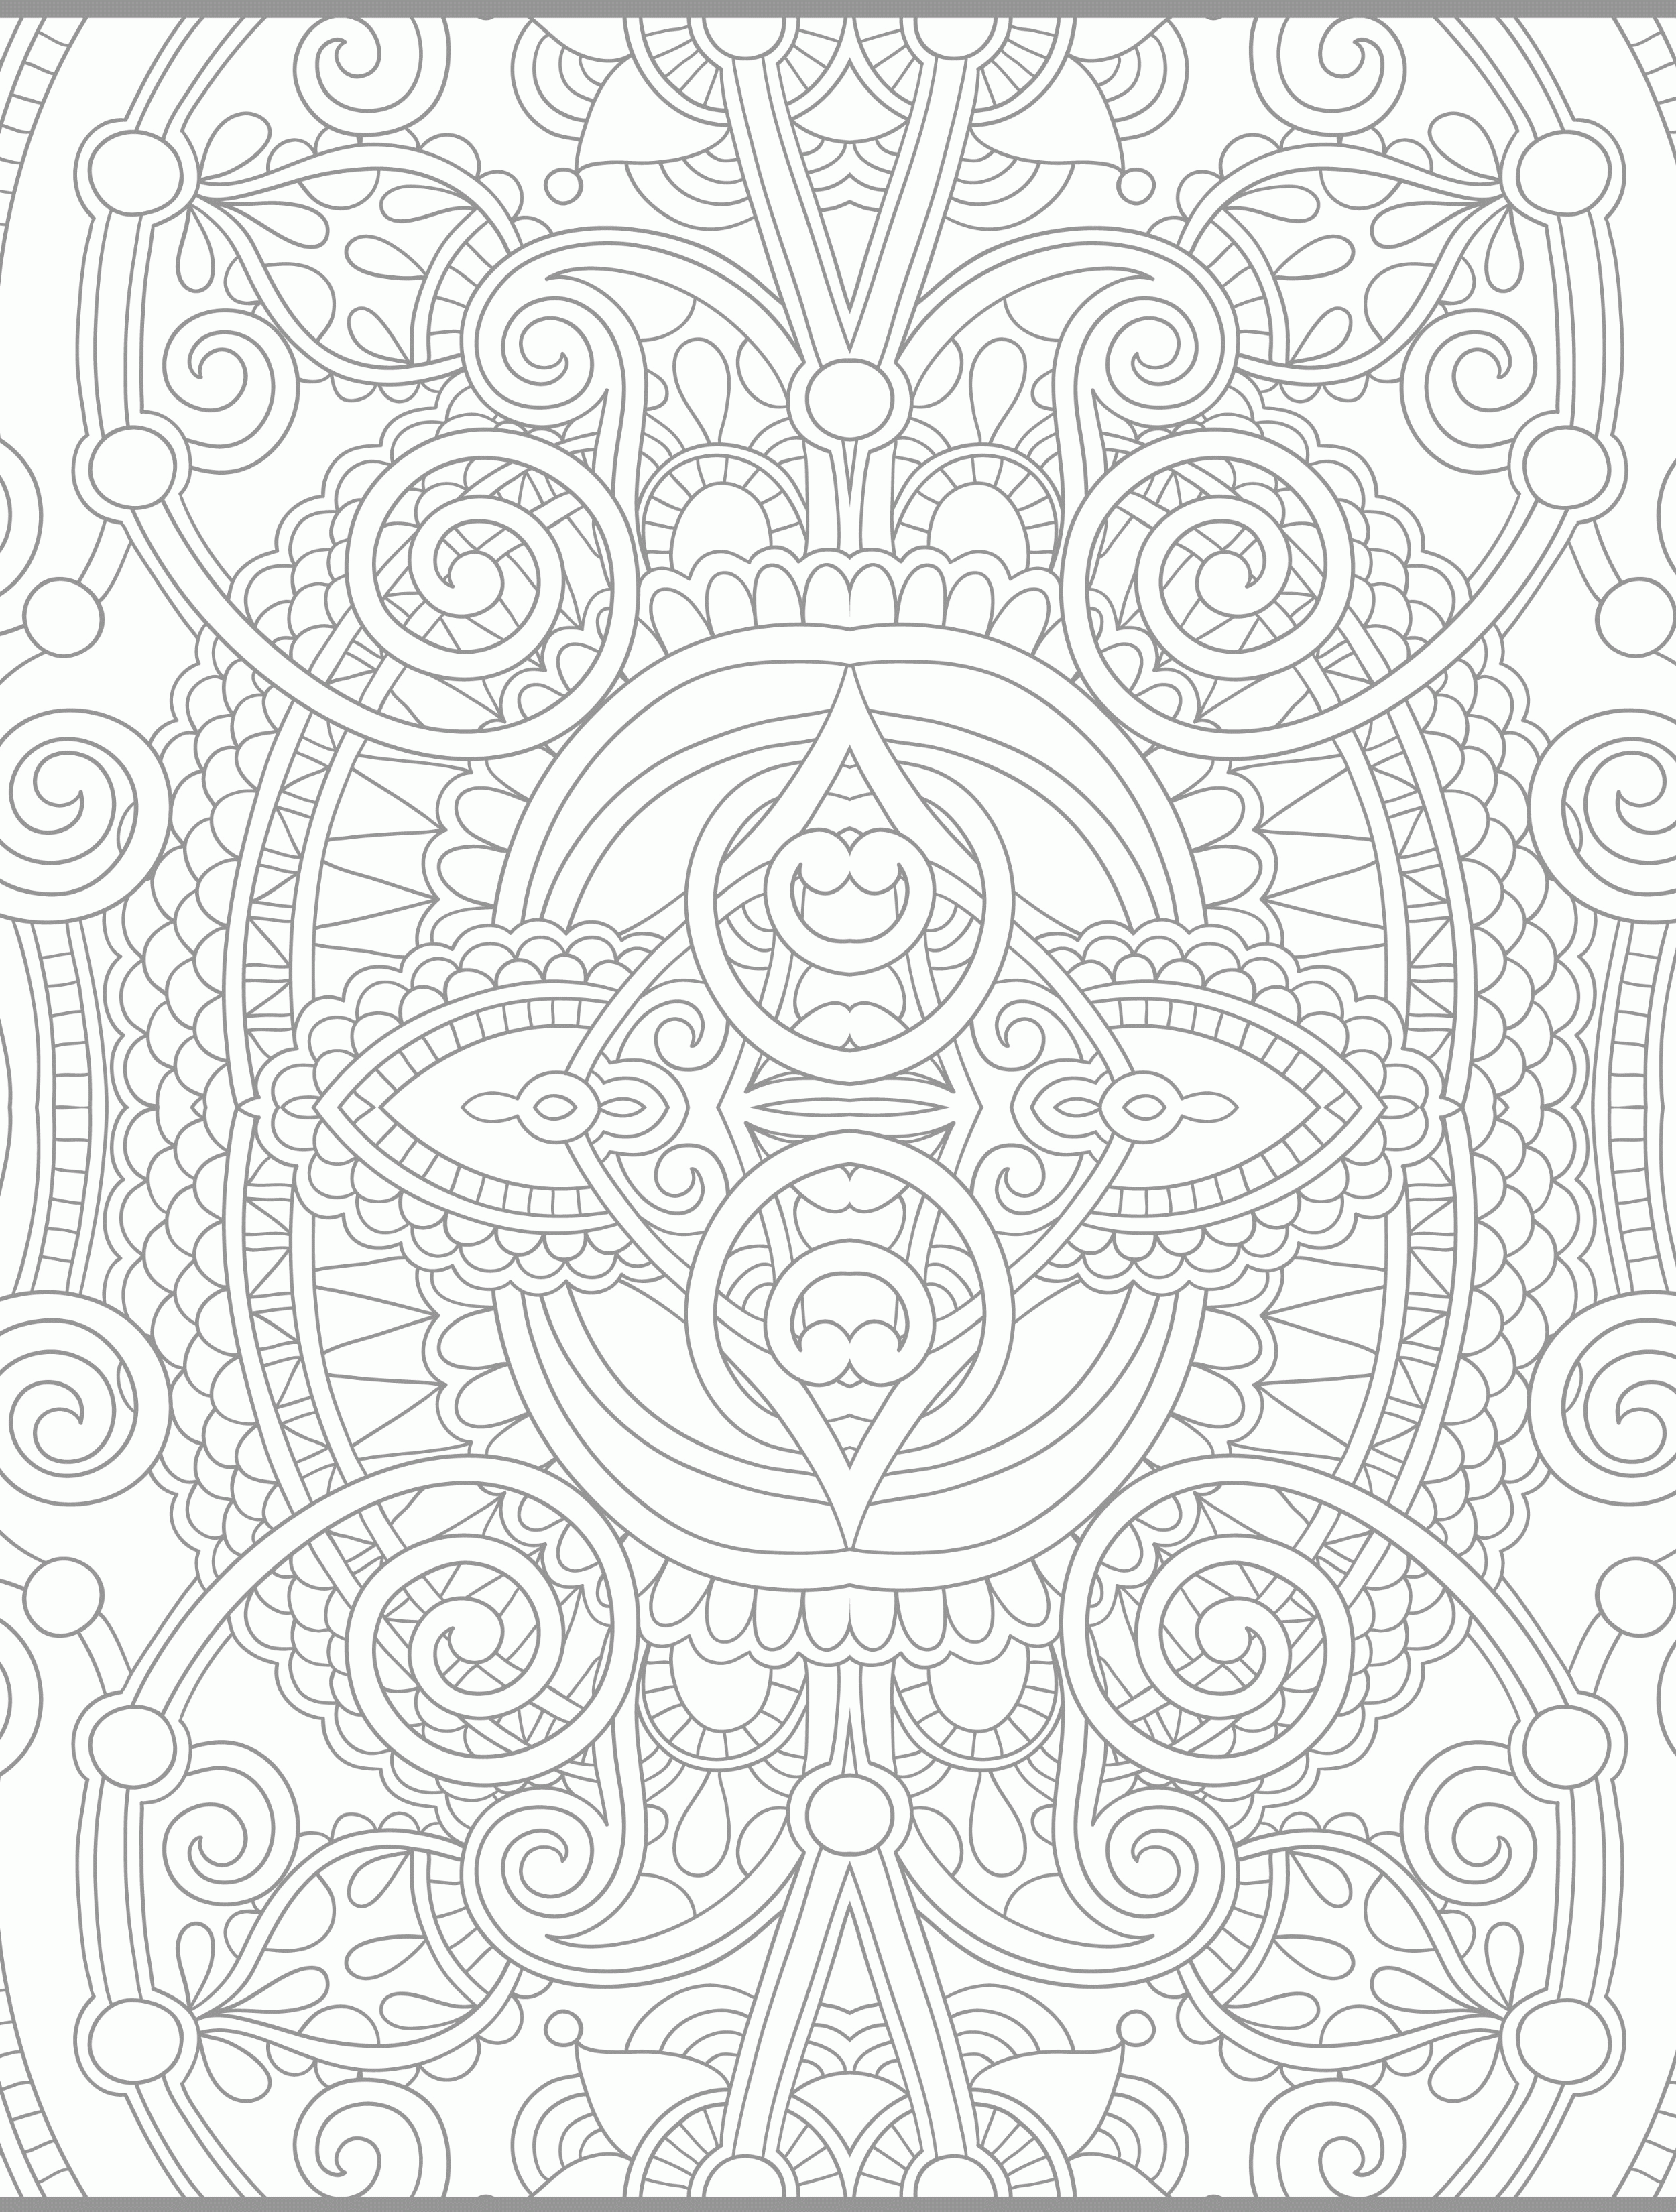 24 More Free Printable Adult Coloring Pages - Page 6 of 25 - Nerdy ...